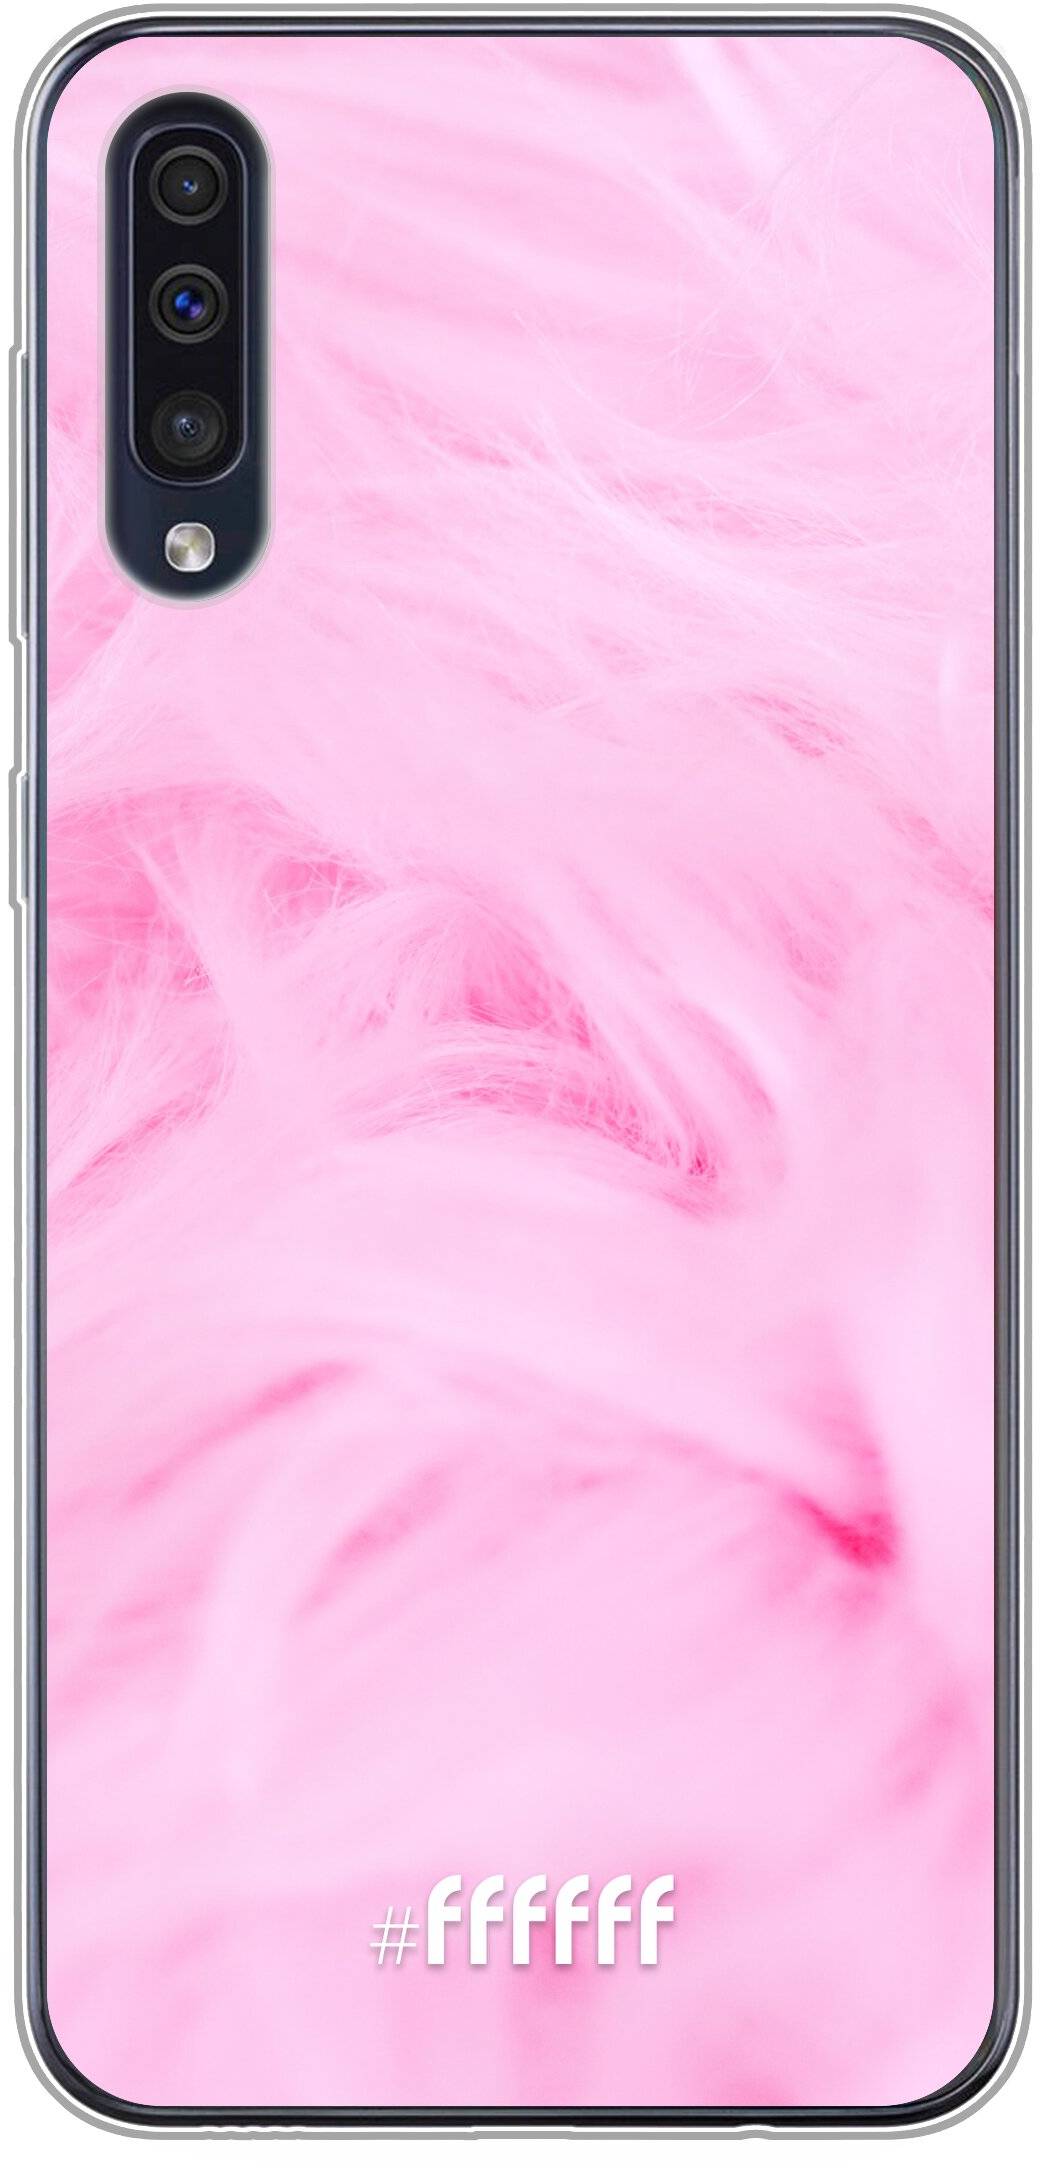 Cotton Candy Galaxy A50s